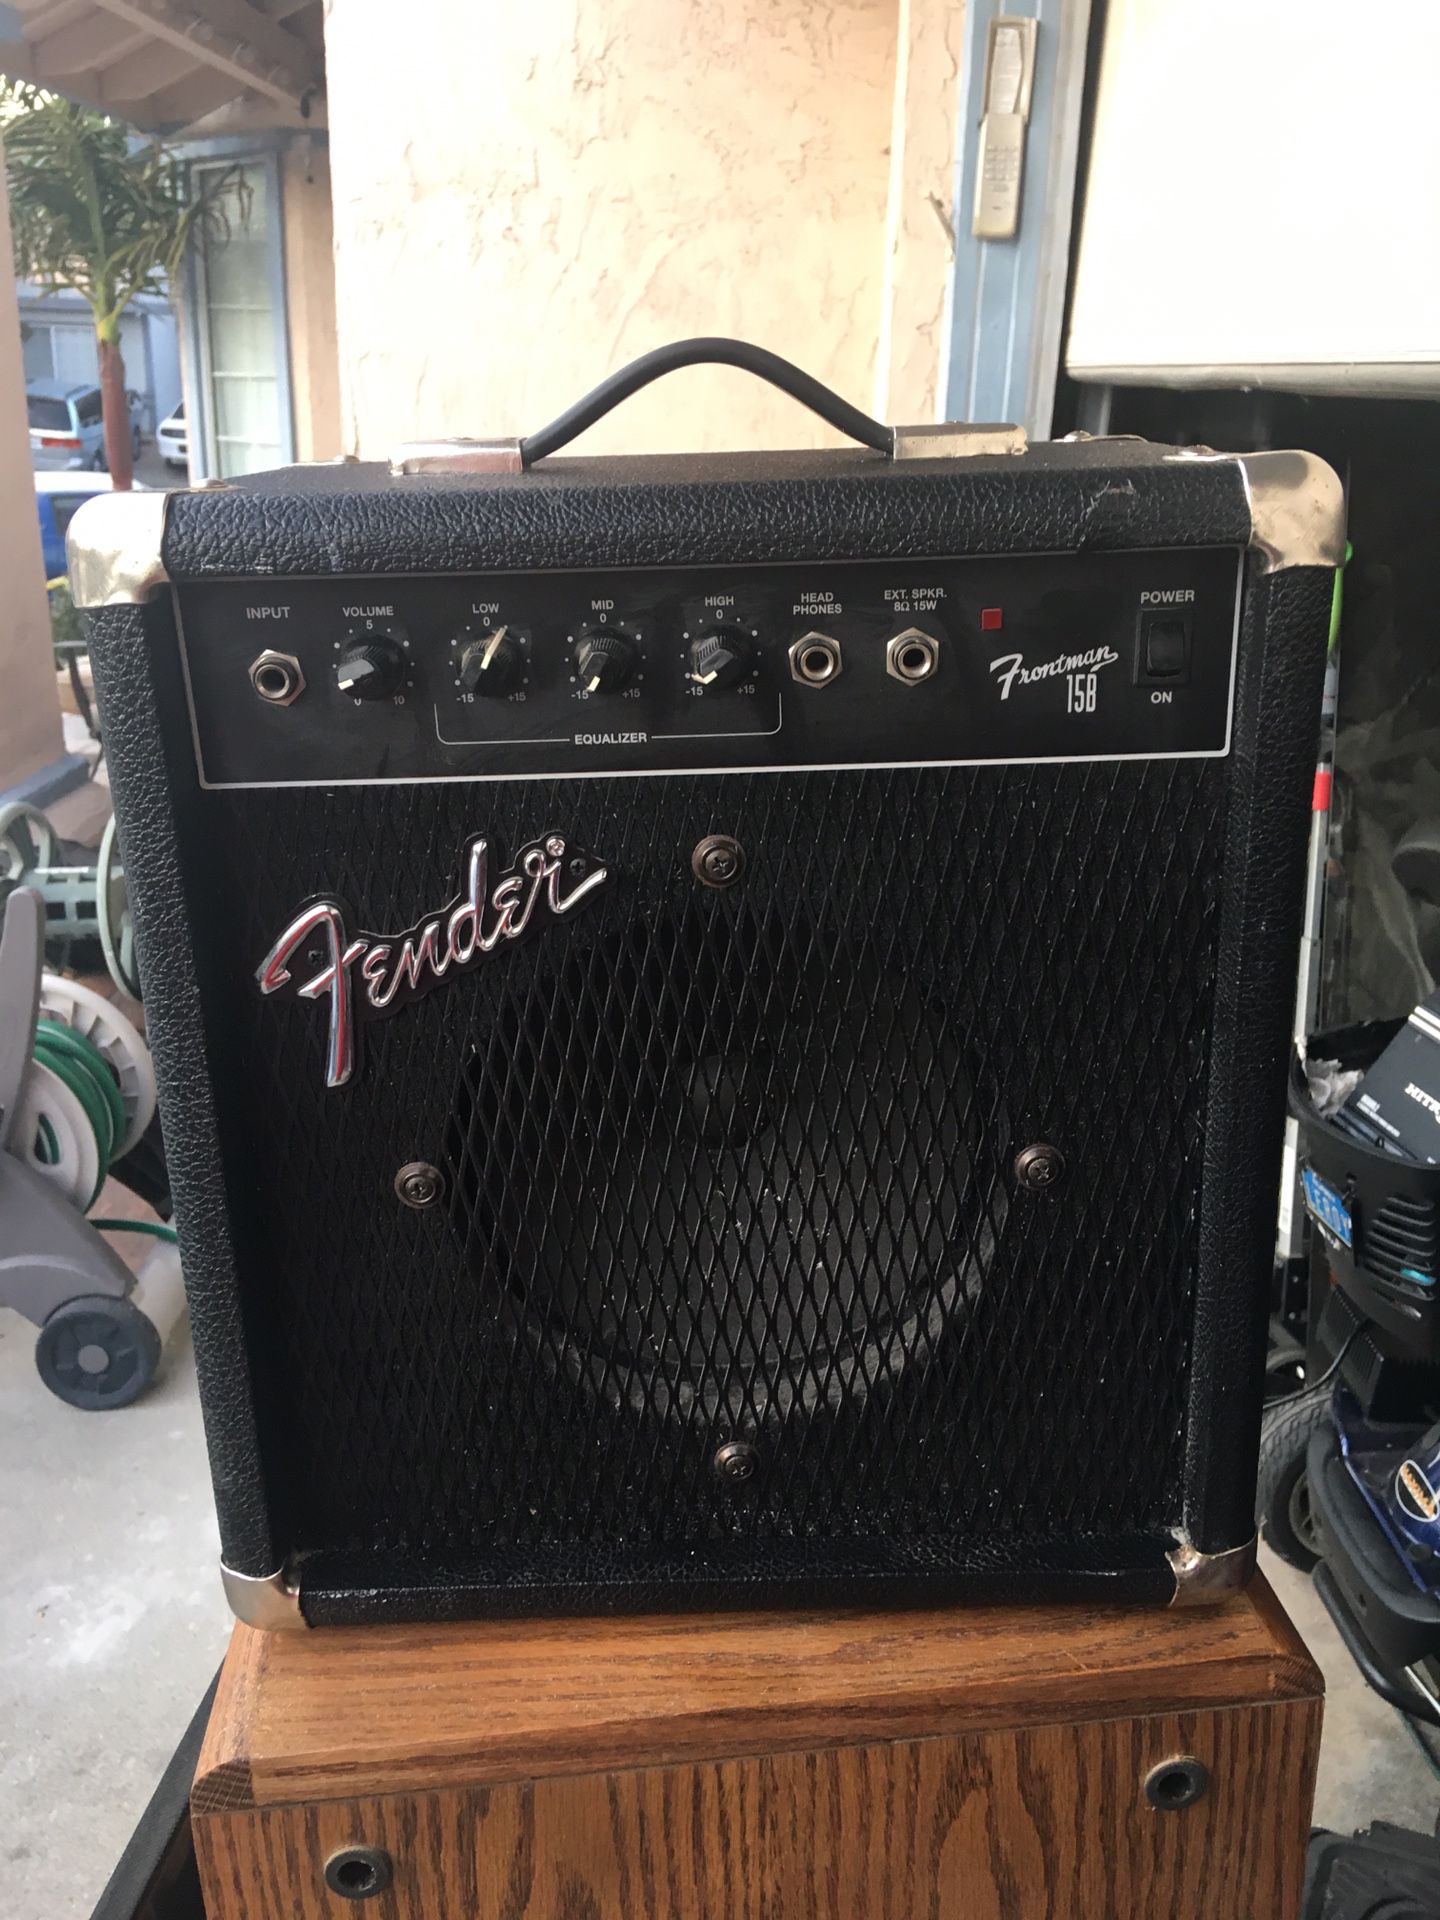 Fender bass amplifier portable in good condition